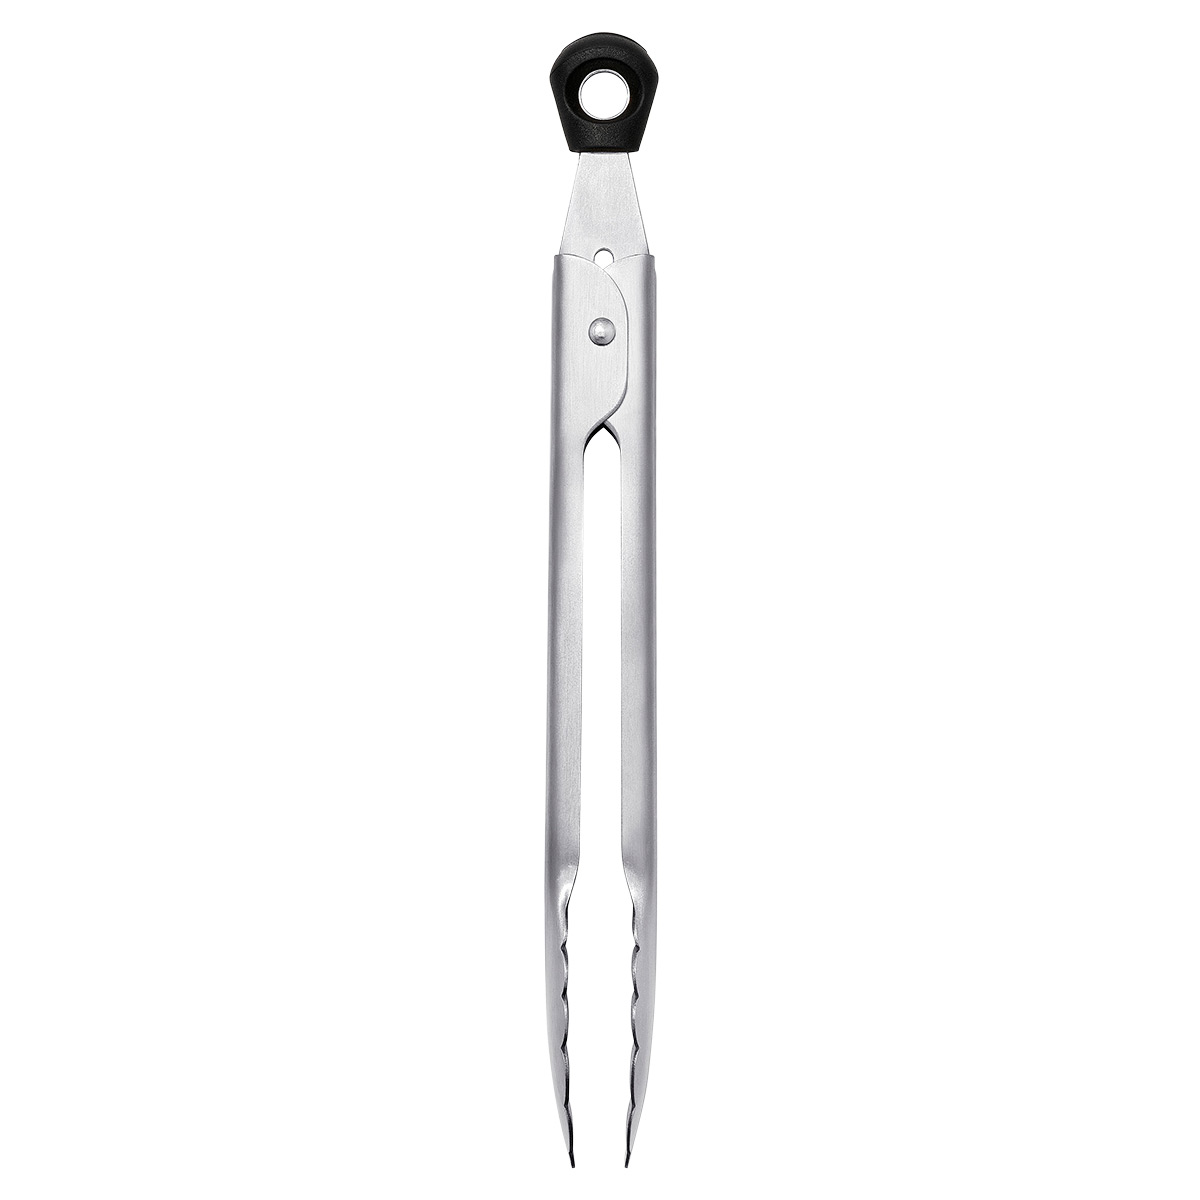 https://www.containerstore.com/catalogimages/394615/10082368-OXO-Mini-Tongs-VEN3.jpg